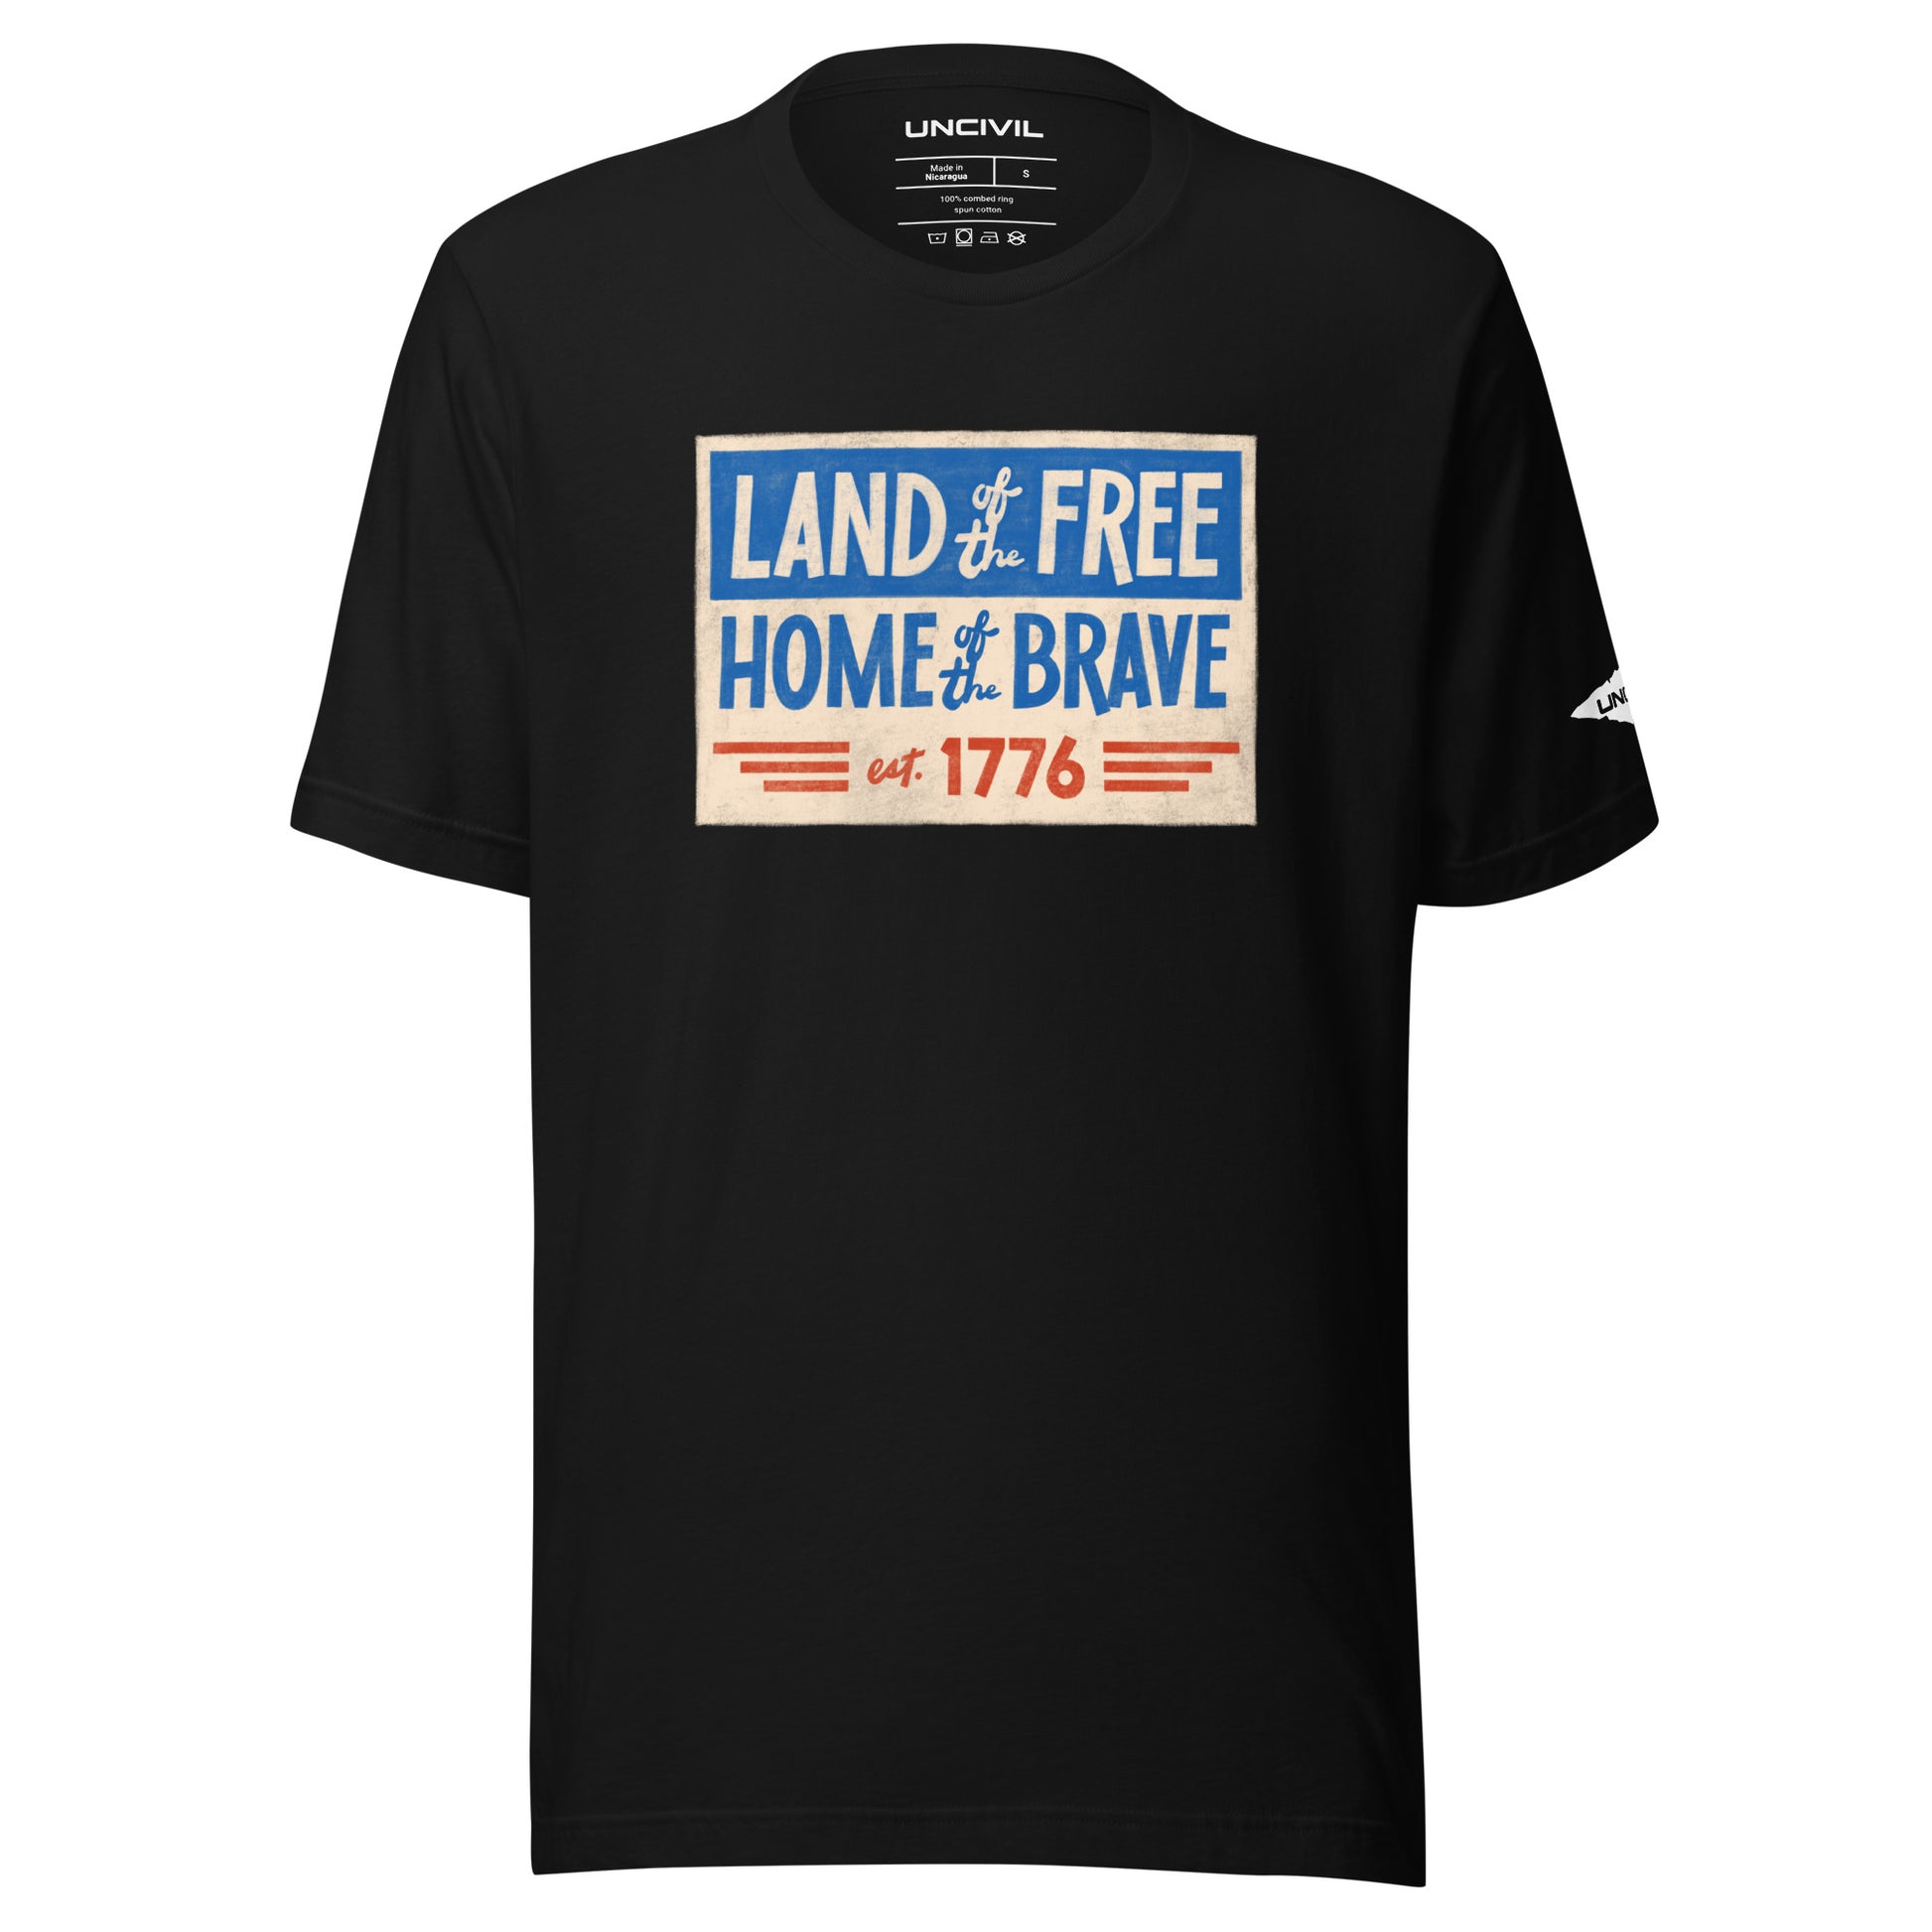 Land of the Free Home of the Brave t-shirt, black unisex patriotic shirt.